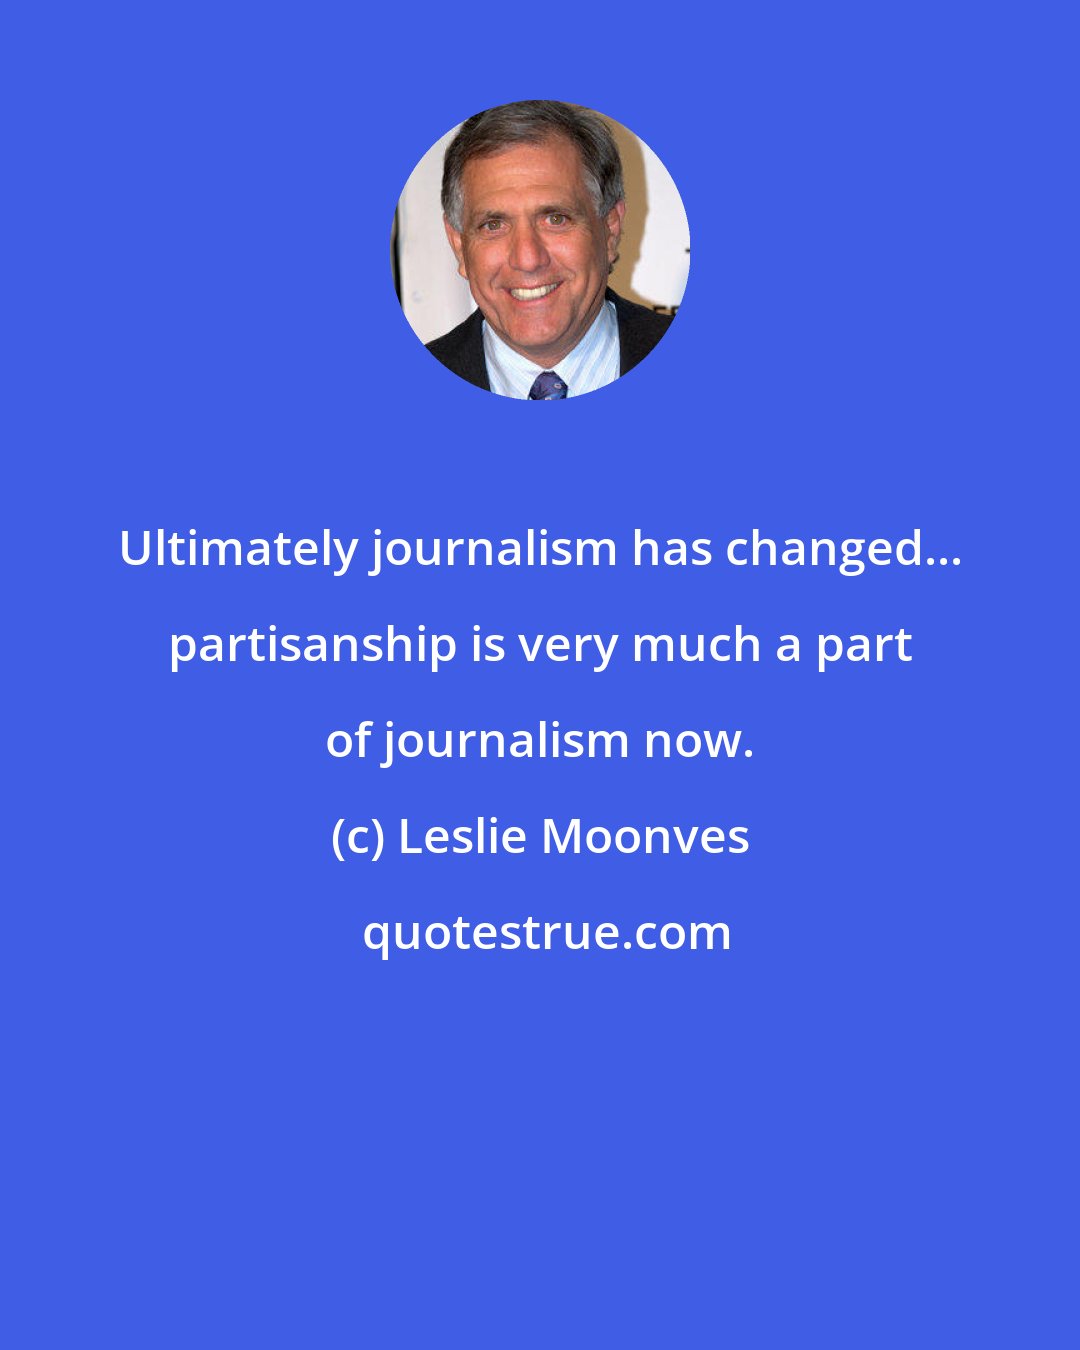 Leslie Moonves: Ultimately journalism has changed... partisanship is very much a part of journalism now.